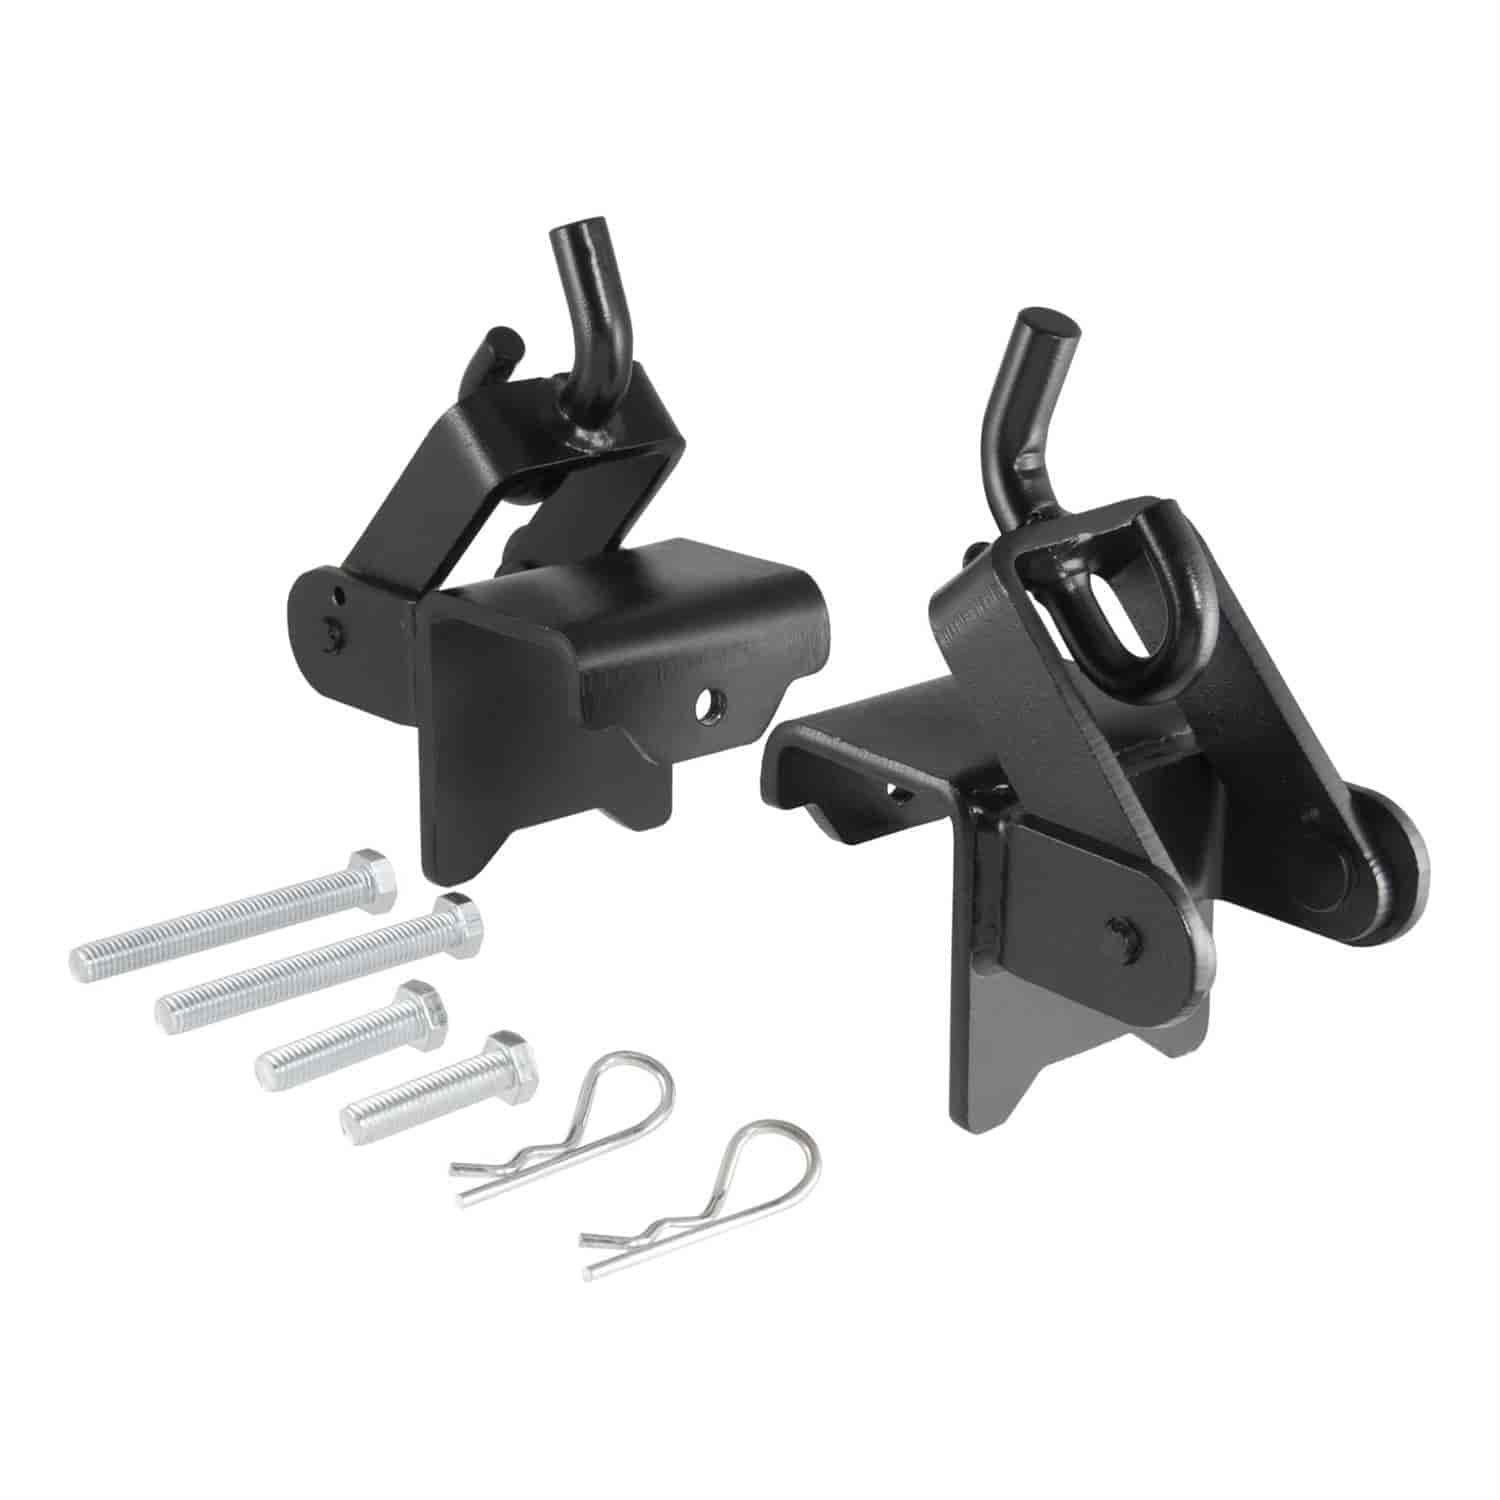 Weight Distribution Hitch Hook-Up Bracket For Trailers with LP Tanks